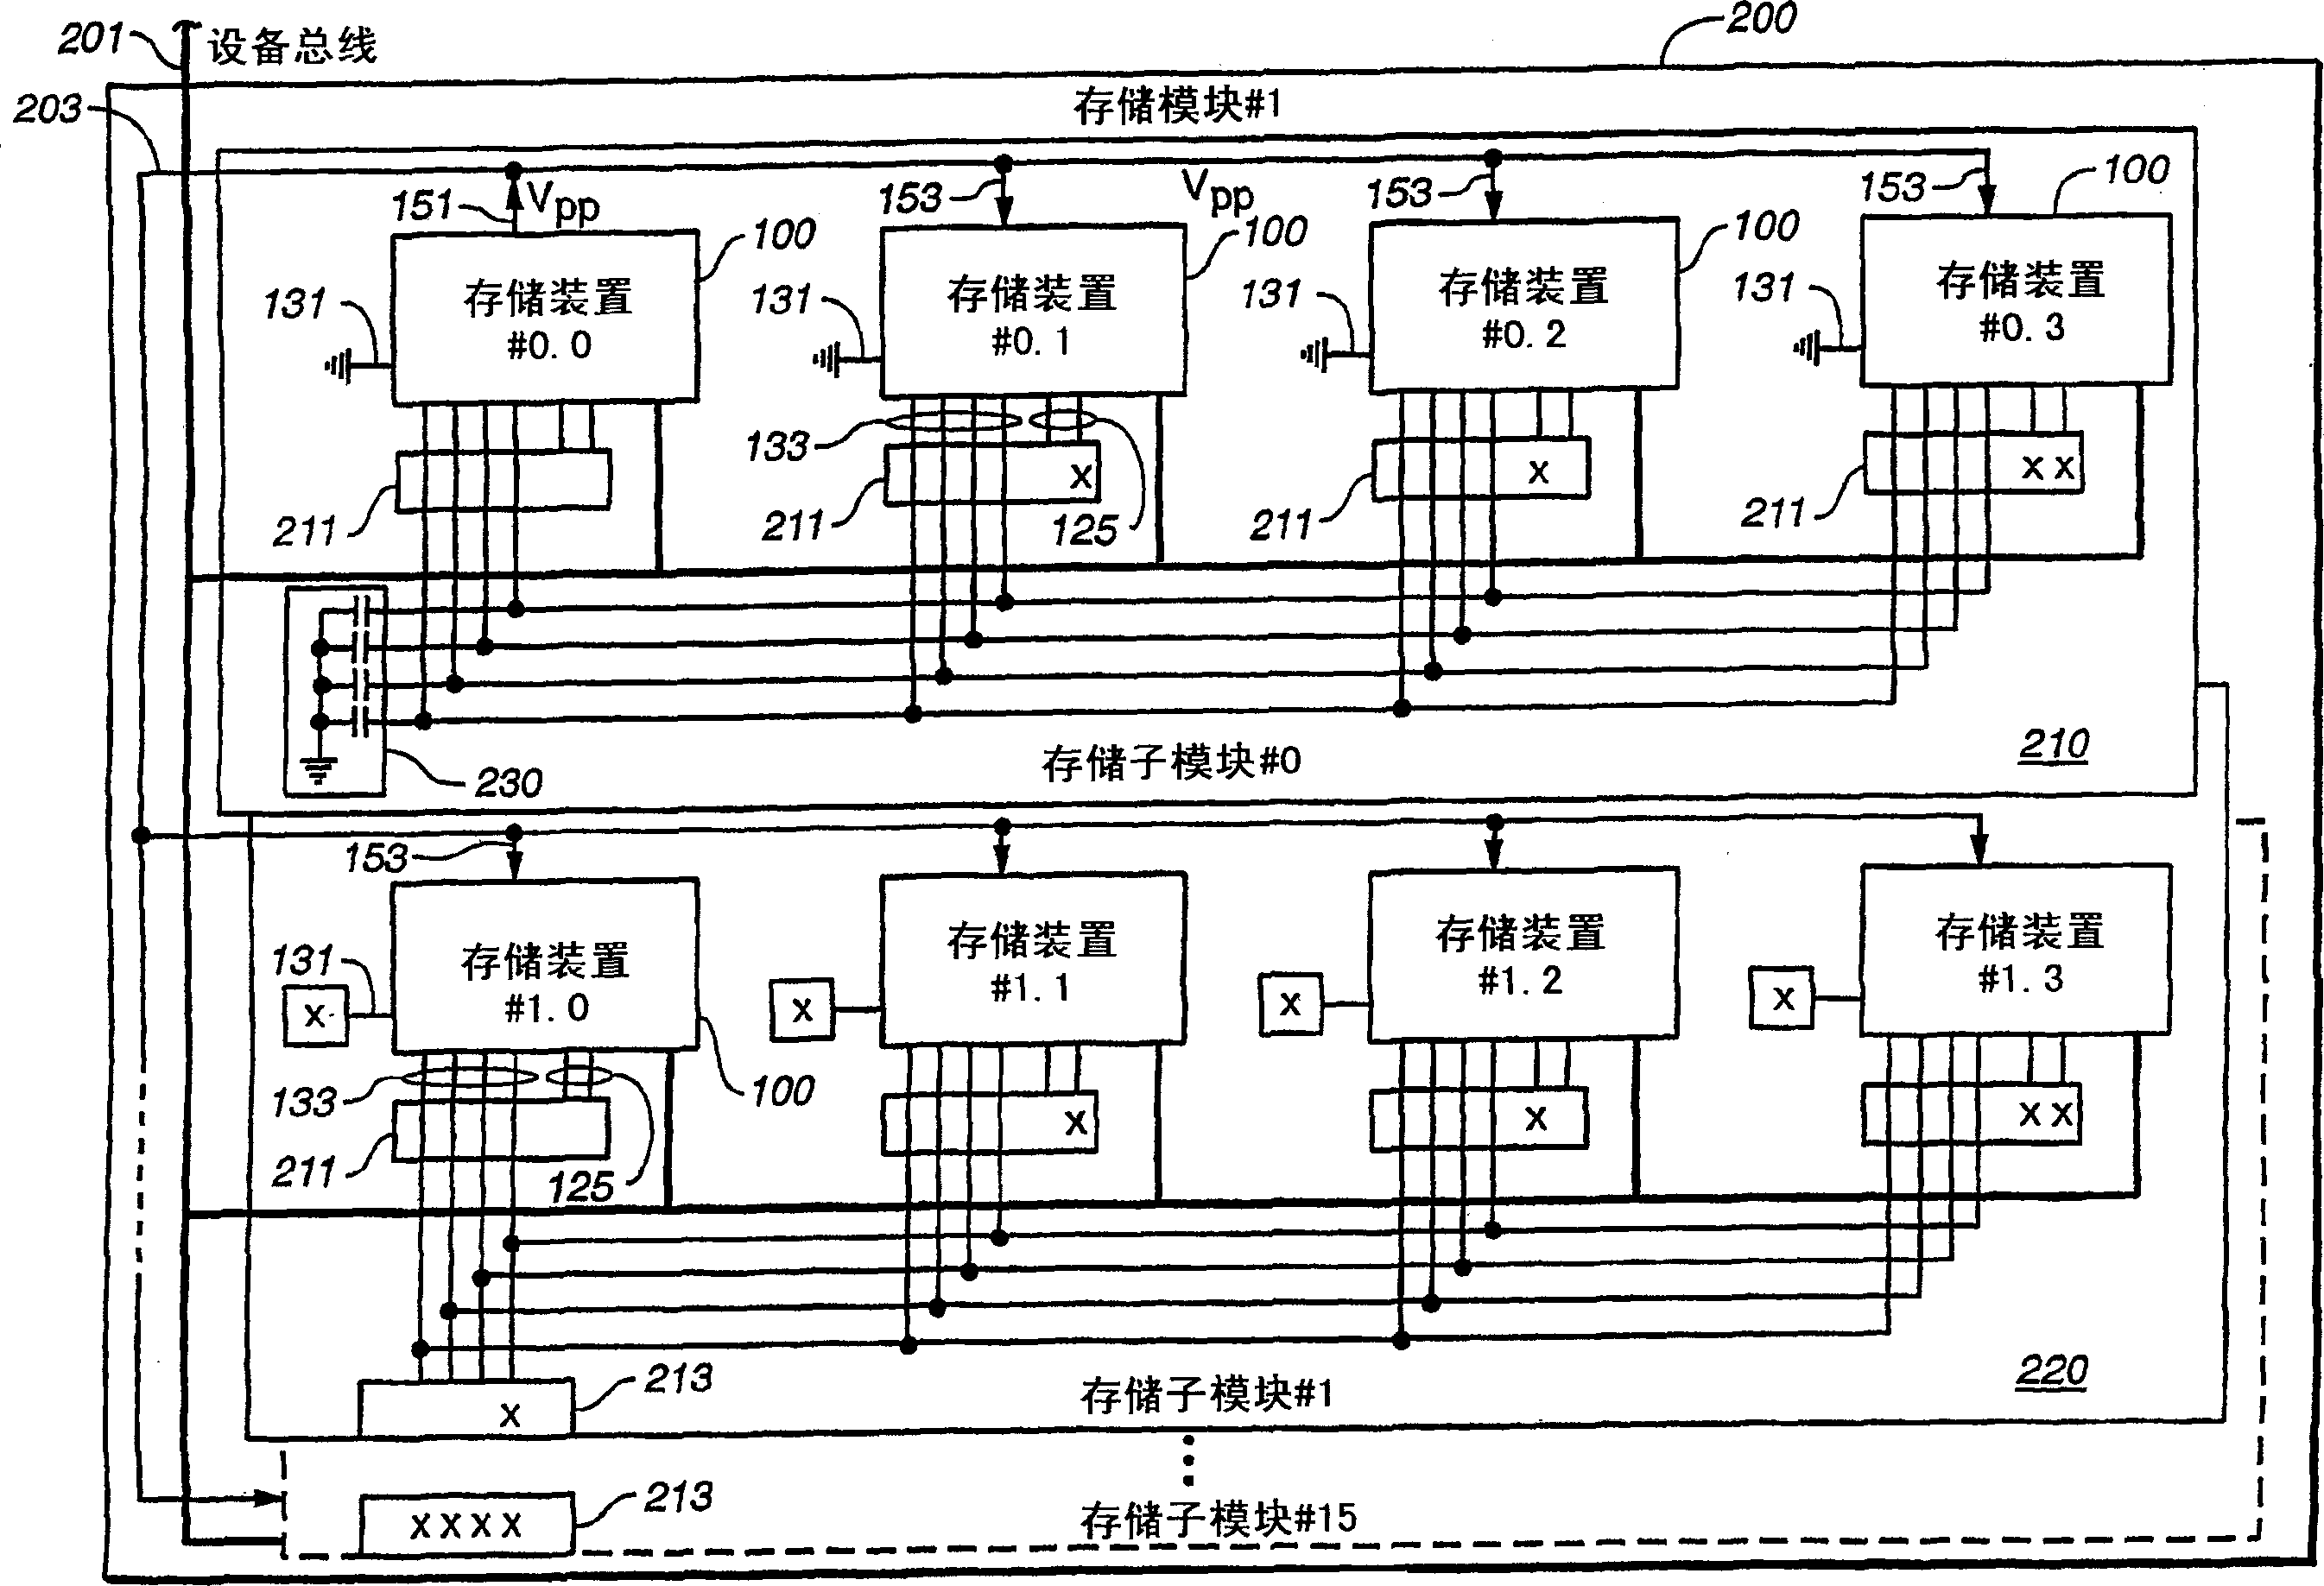 EEPROM memory chip with multiple use pinouts